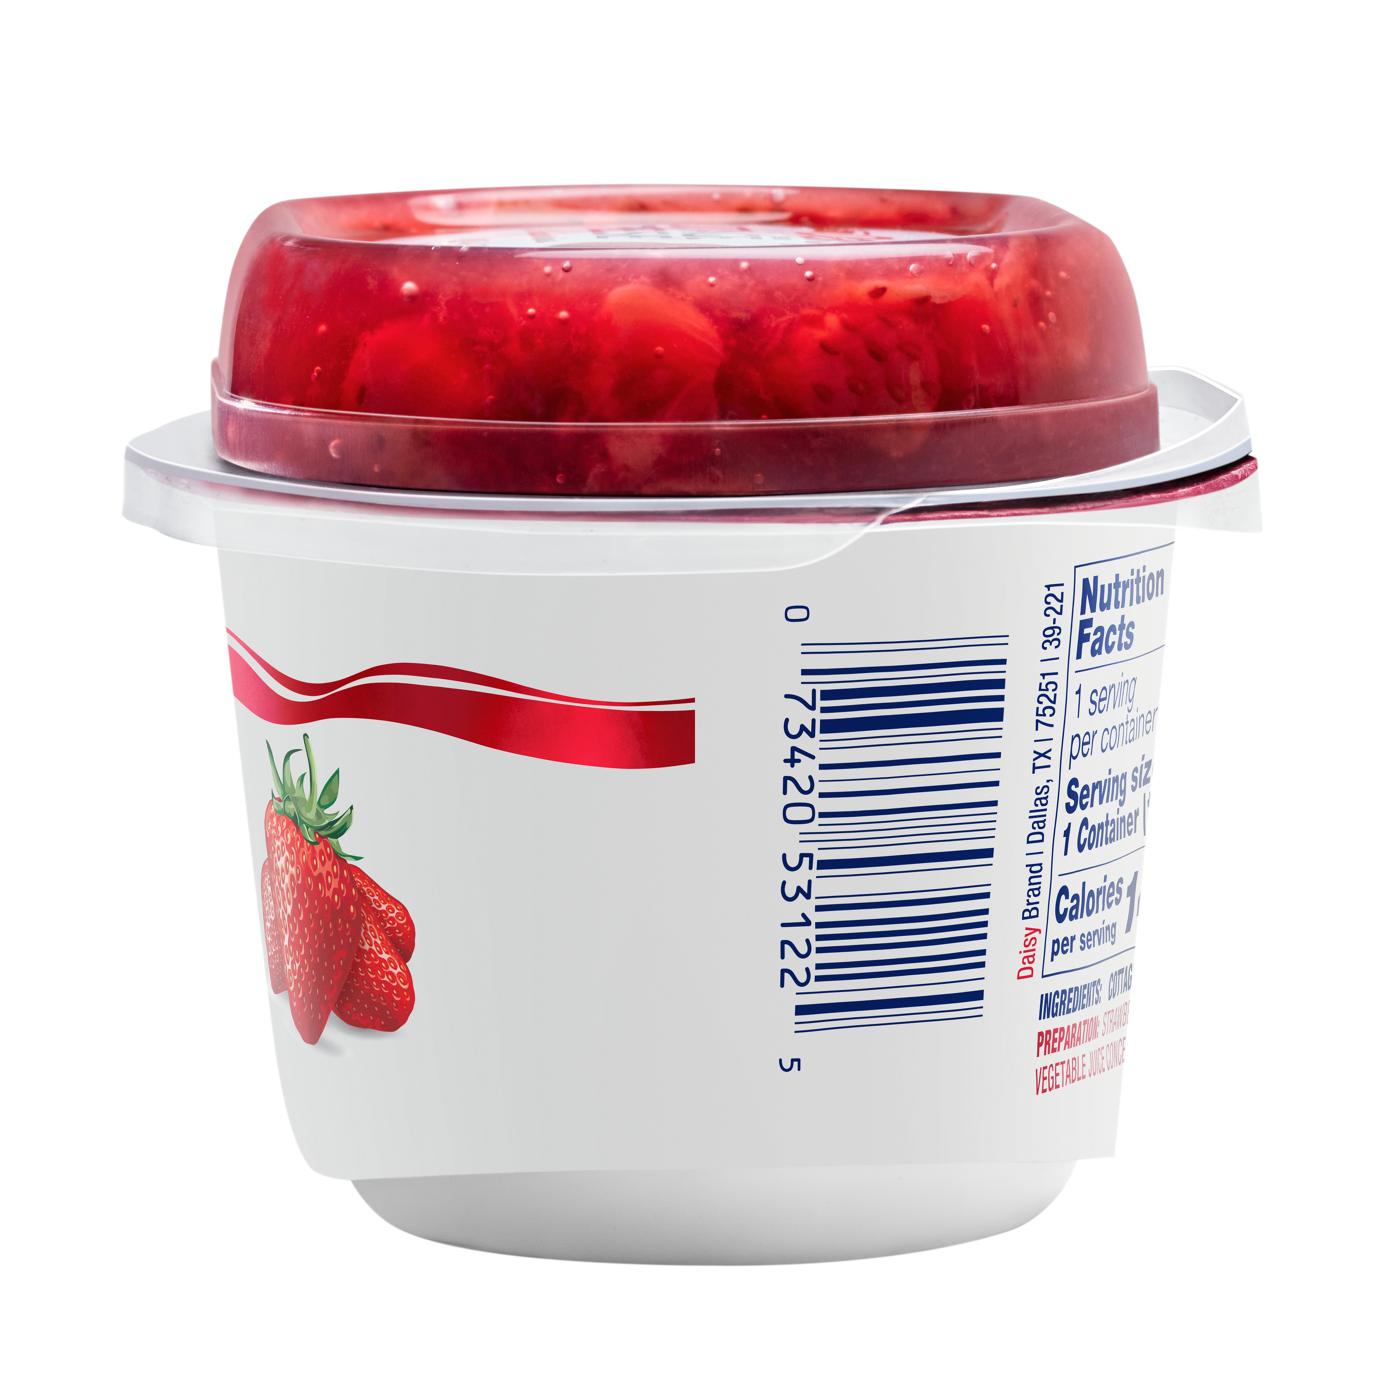 Daisy Cottage Cheese with Strawberries; image 4 of 5